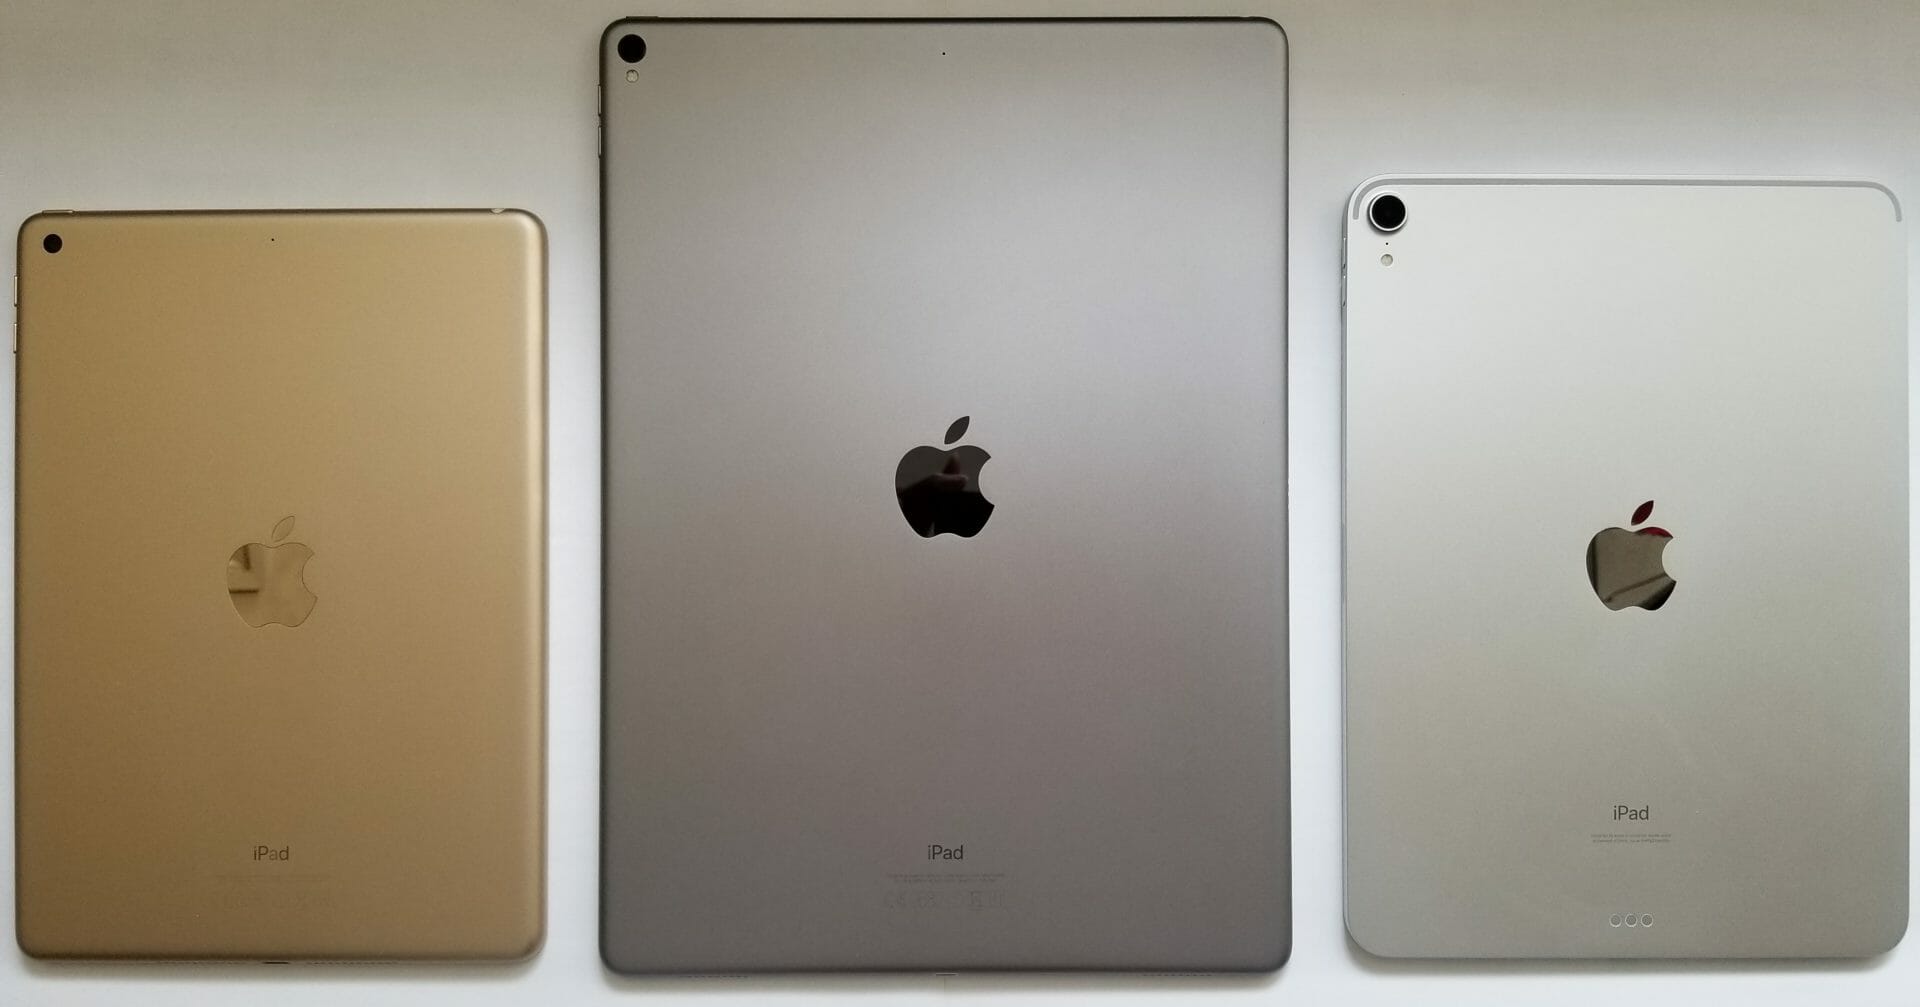 3 Ipad models in different colors